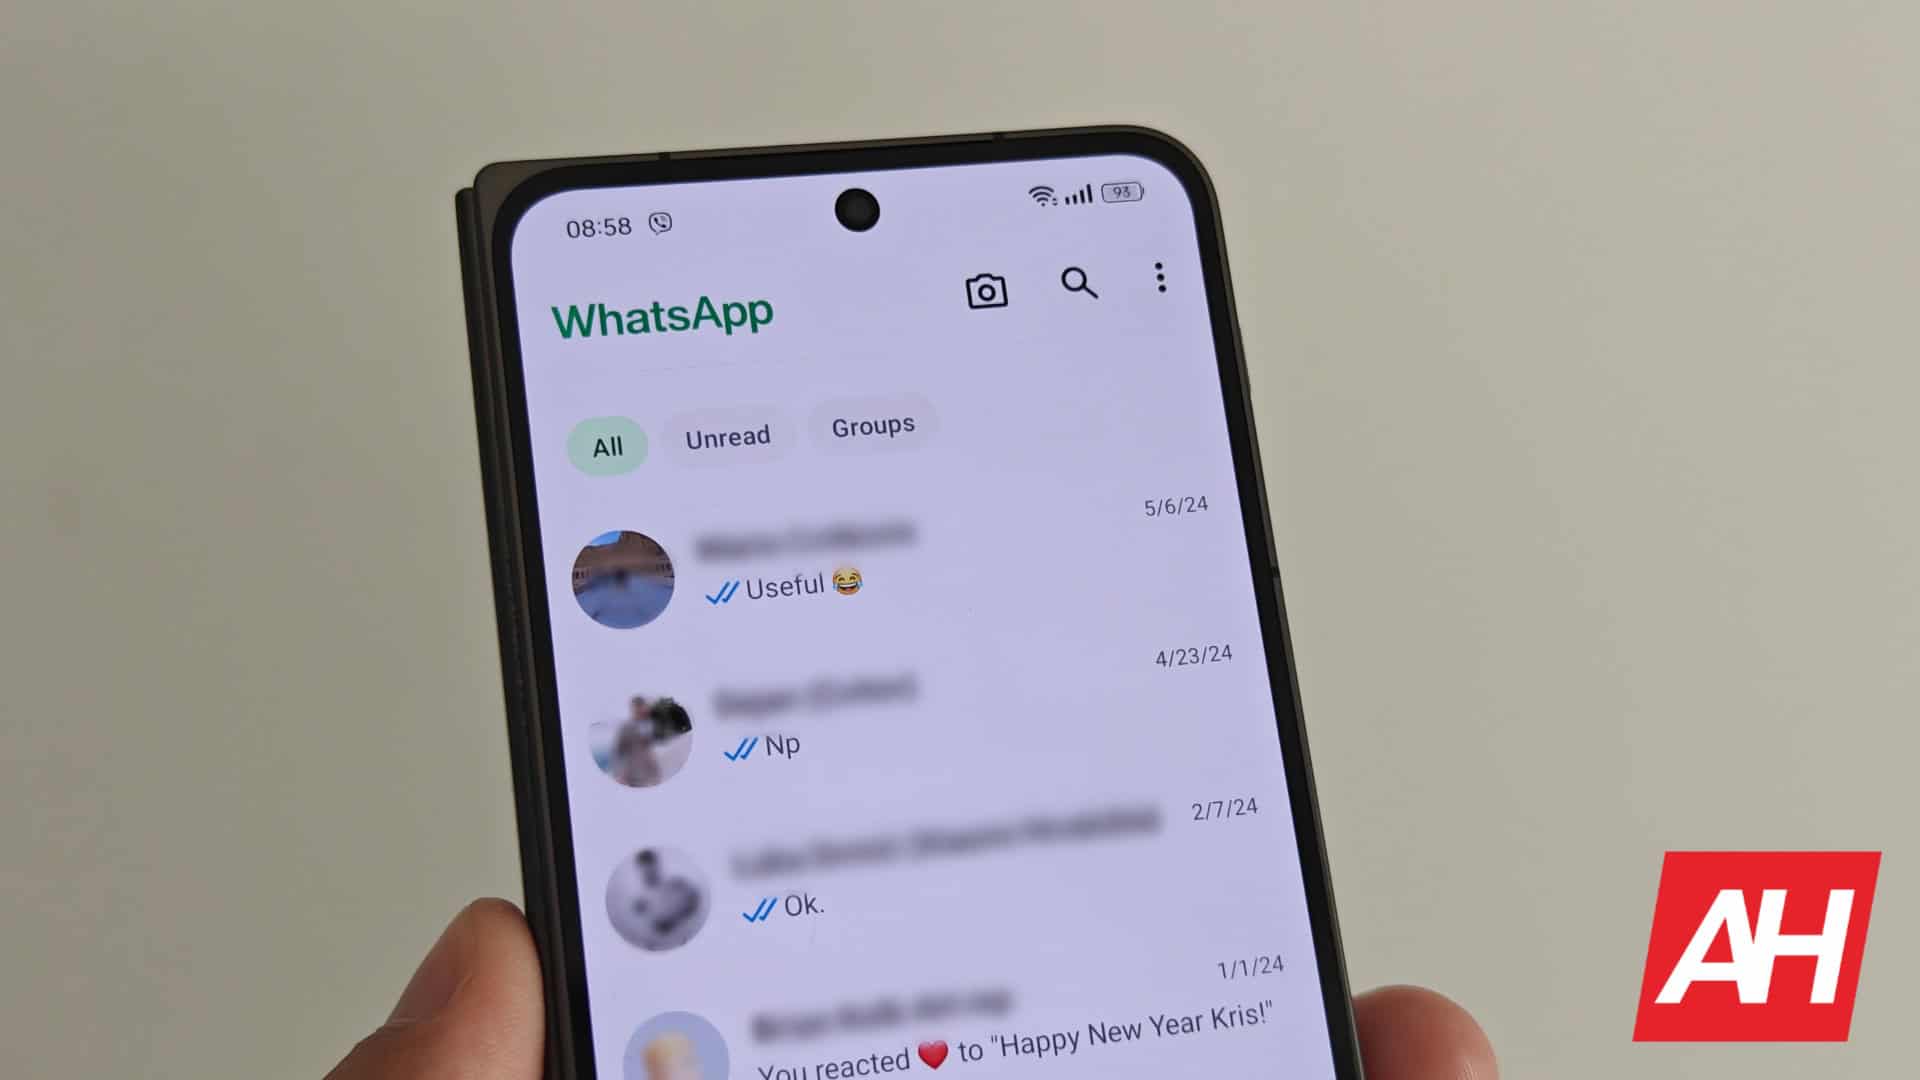 WhatsApp now makes it possible to share minute-long voice status updates